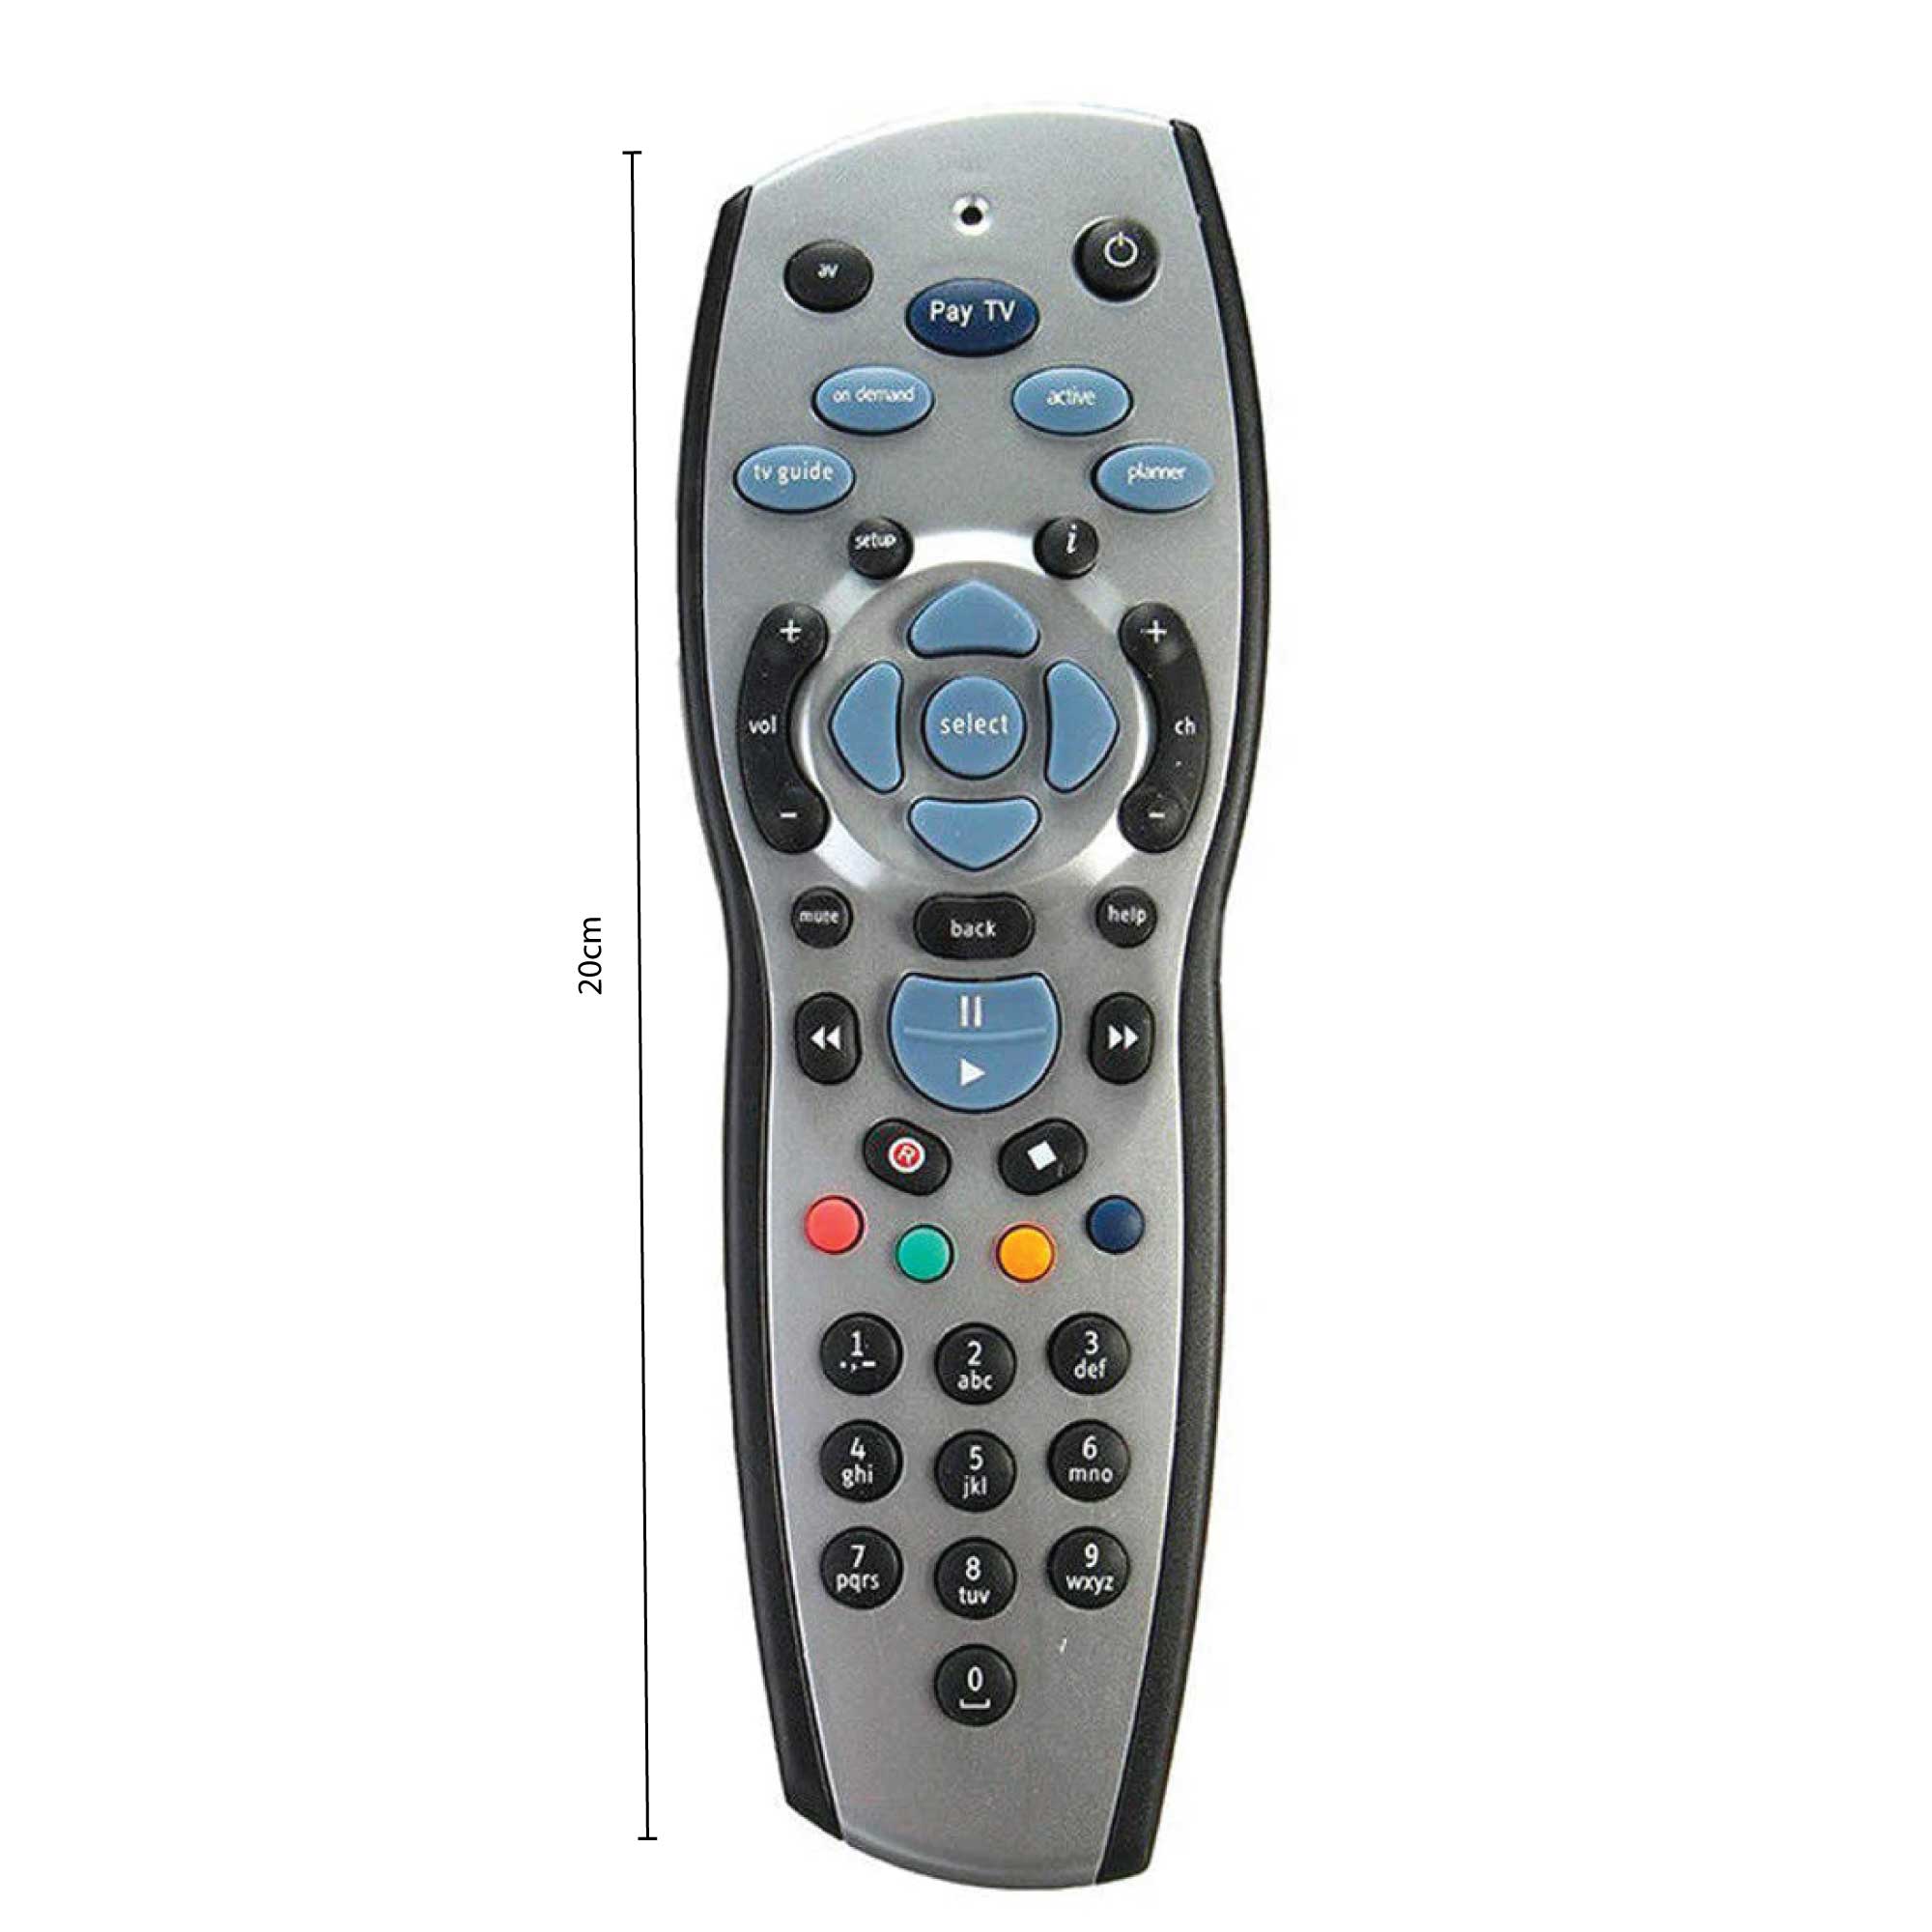 2x PayTV Remote Control Compatible with Foxtel MYSTAR SKY NEW ZEALAND - Silver - 0